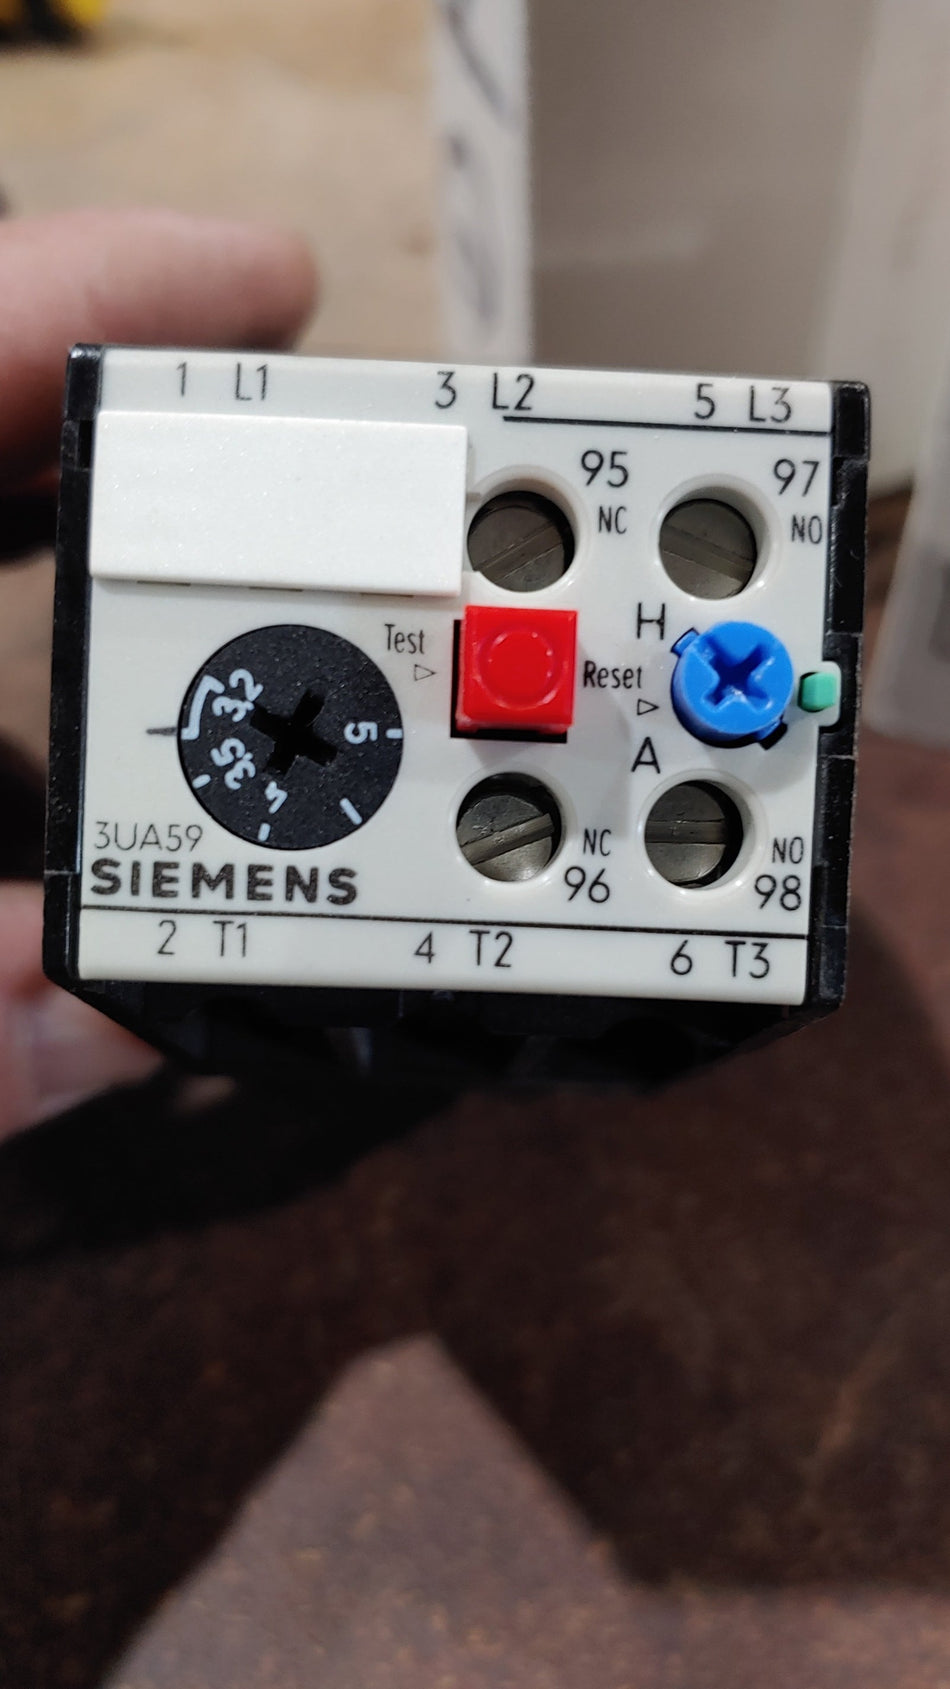 3UA59-00-1F Siemens, overload relay rated for 3.2-5 amps